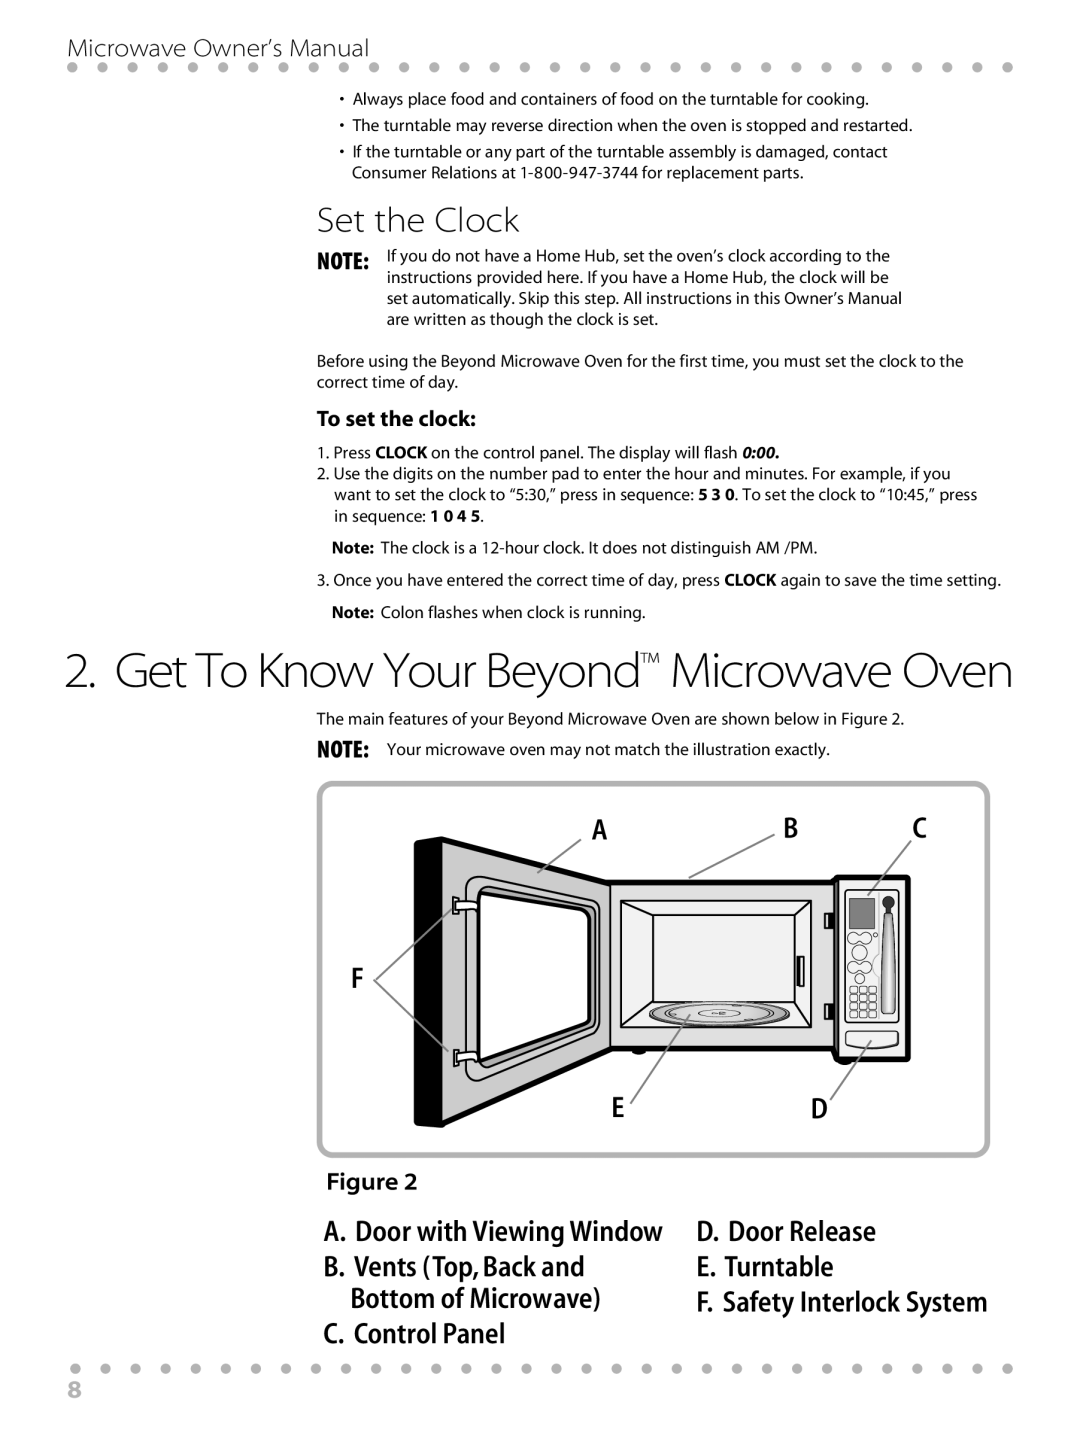 Toastmaster WBYMW1 manual Set the Clock, A.Door with Viewing Window, Get To Know Your Beyond Microwave Oven, Ab C F Ed 